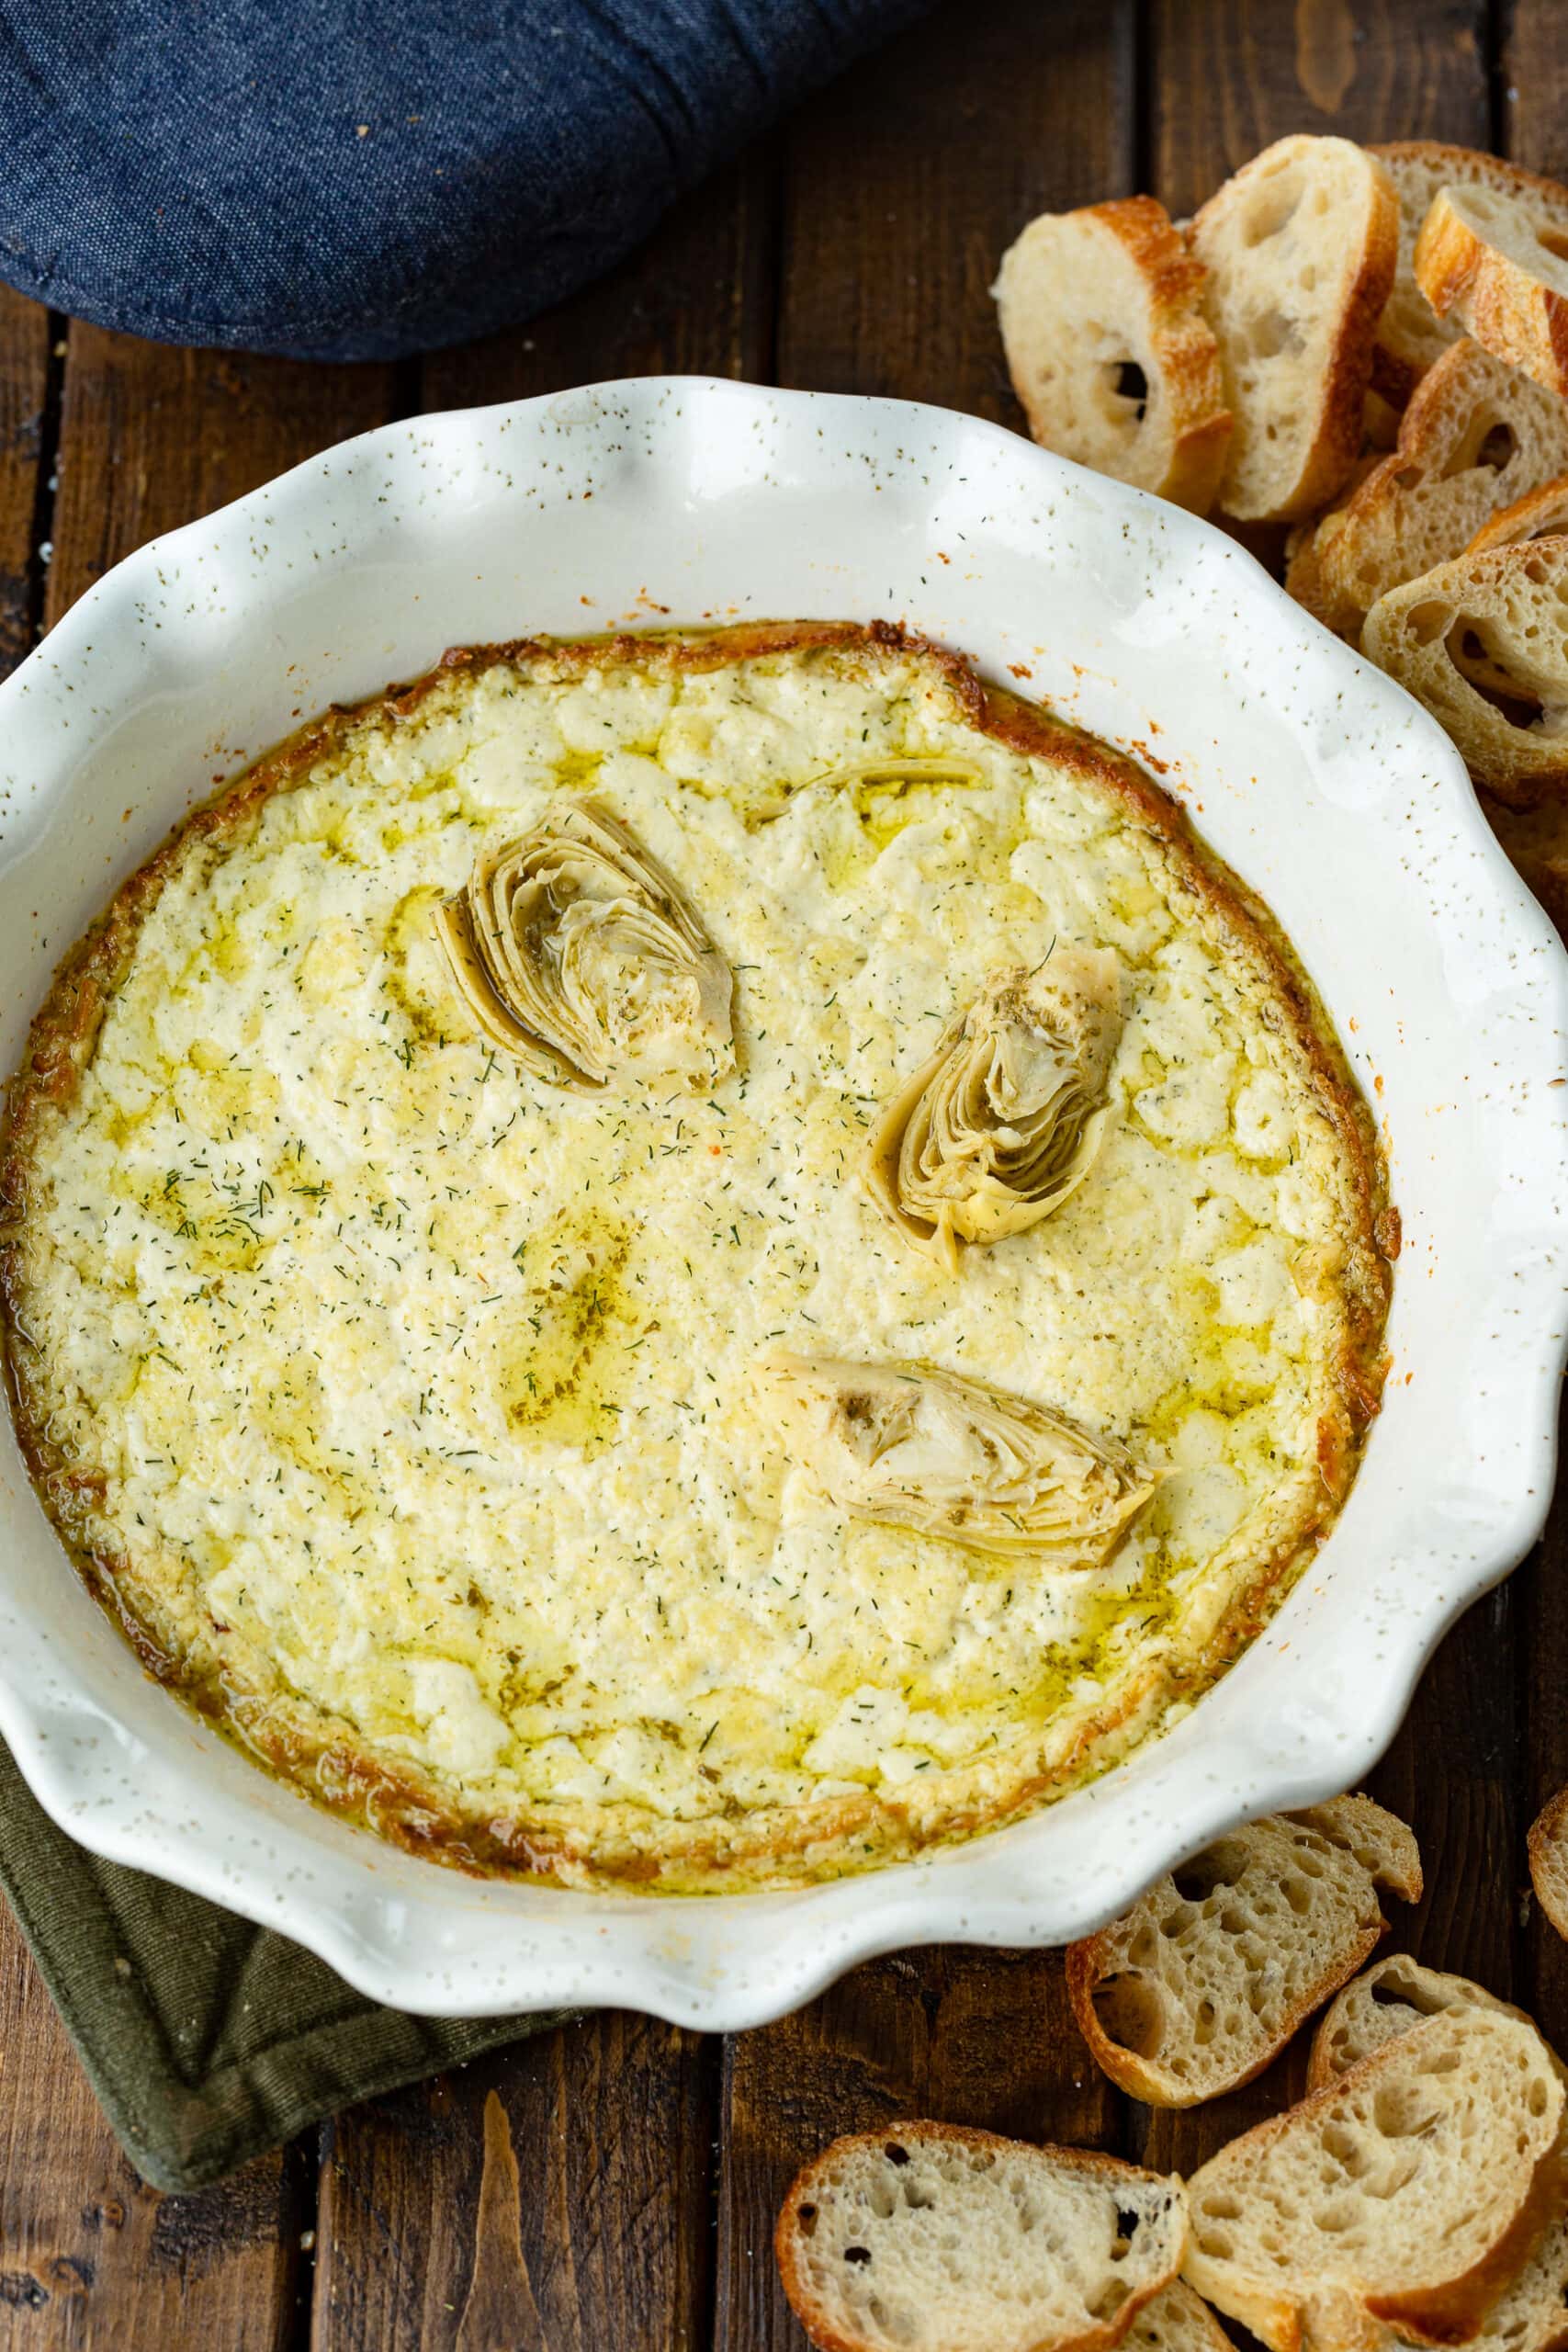 a photo of a white ceramic circular baking dish full of golden creamy artichoke dip with several pieces of artichoke placed on top.